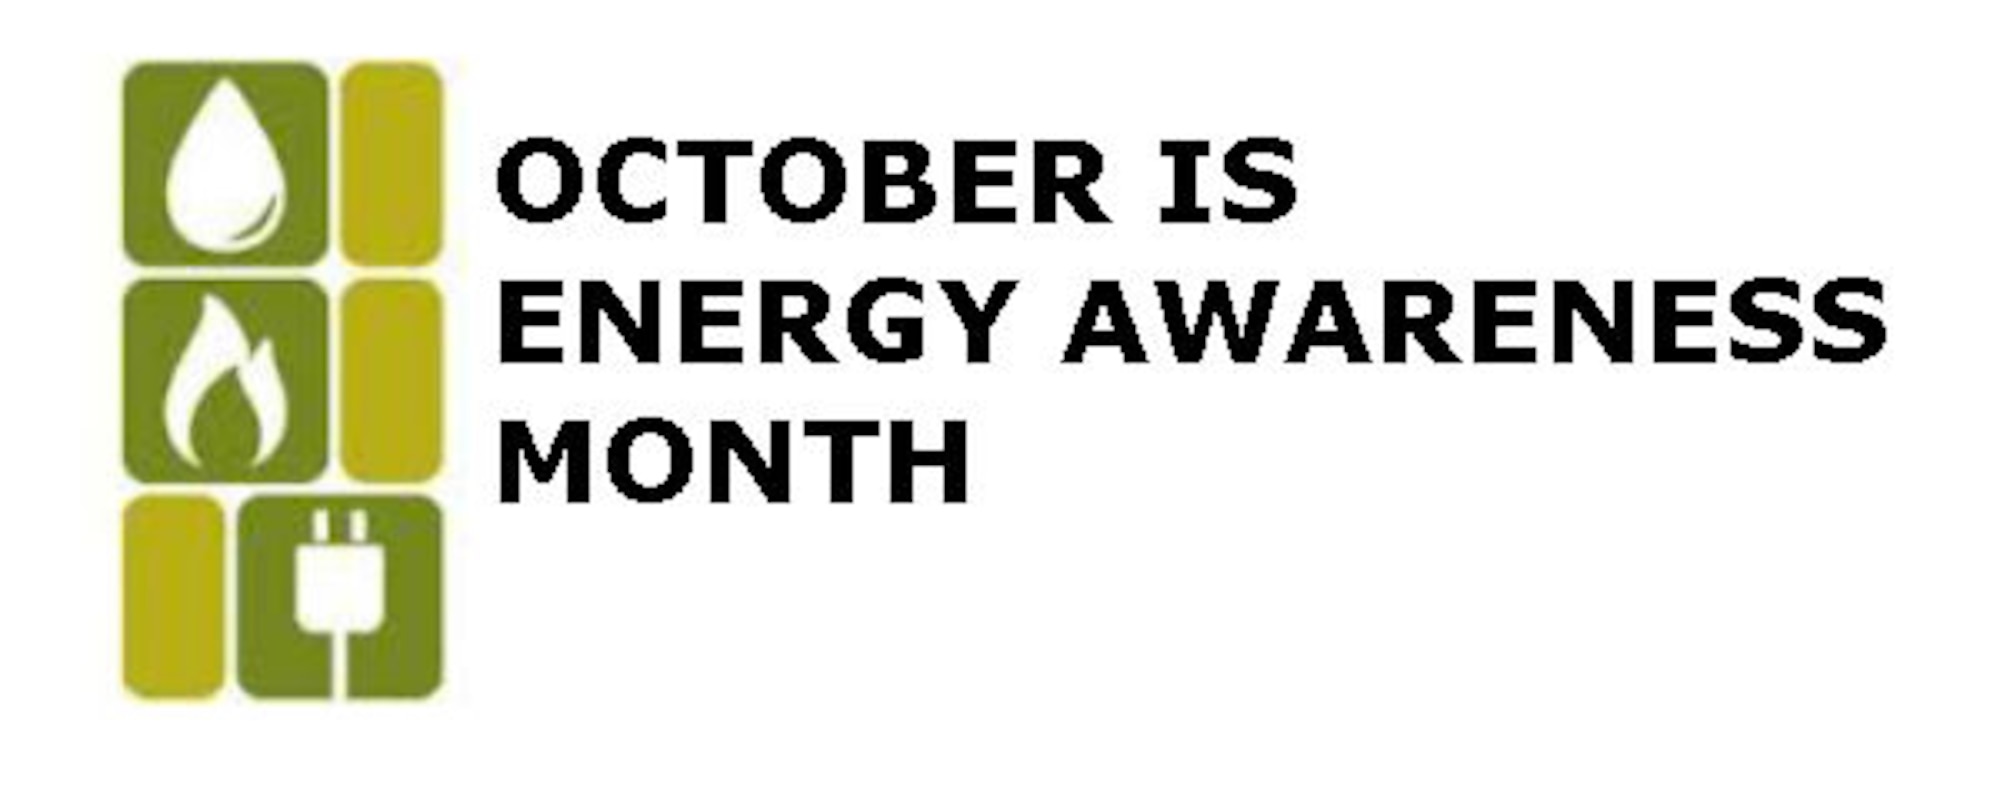 October is Energy Awareness Month and Joint Base San Antonio is committed to reducing energy consumption to meet all conservation directives.  
The JBSA Energy Program is designed to comply with federally mandated energy goals while maintaining a healthy and productive workplace.  Energy reduction goals are specified by the new Executive Order 13693 and the Energy Independence and Security Act of 2007, which require federal installations to reduce energy use by 2.5 percent every year for 10 years. The goal is to reduce energy per square foot by a total of 25 percent by fiscal year 2025, based on a fiscal year 2015 baseline. 
